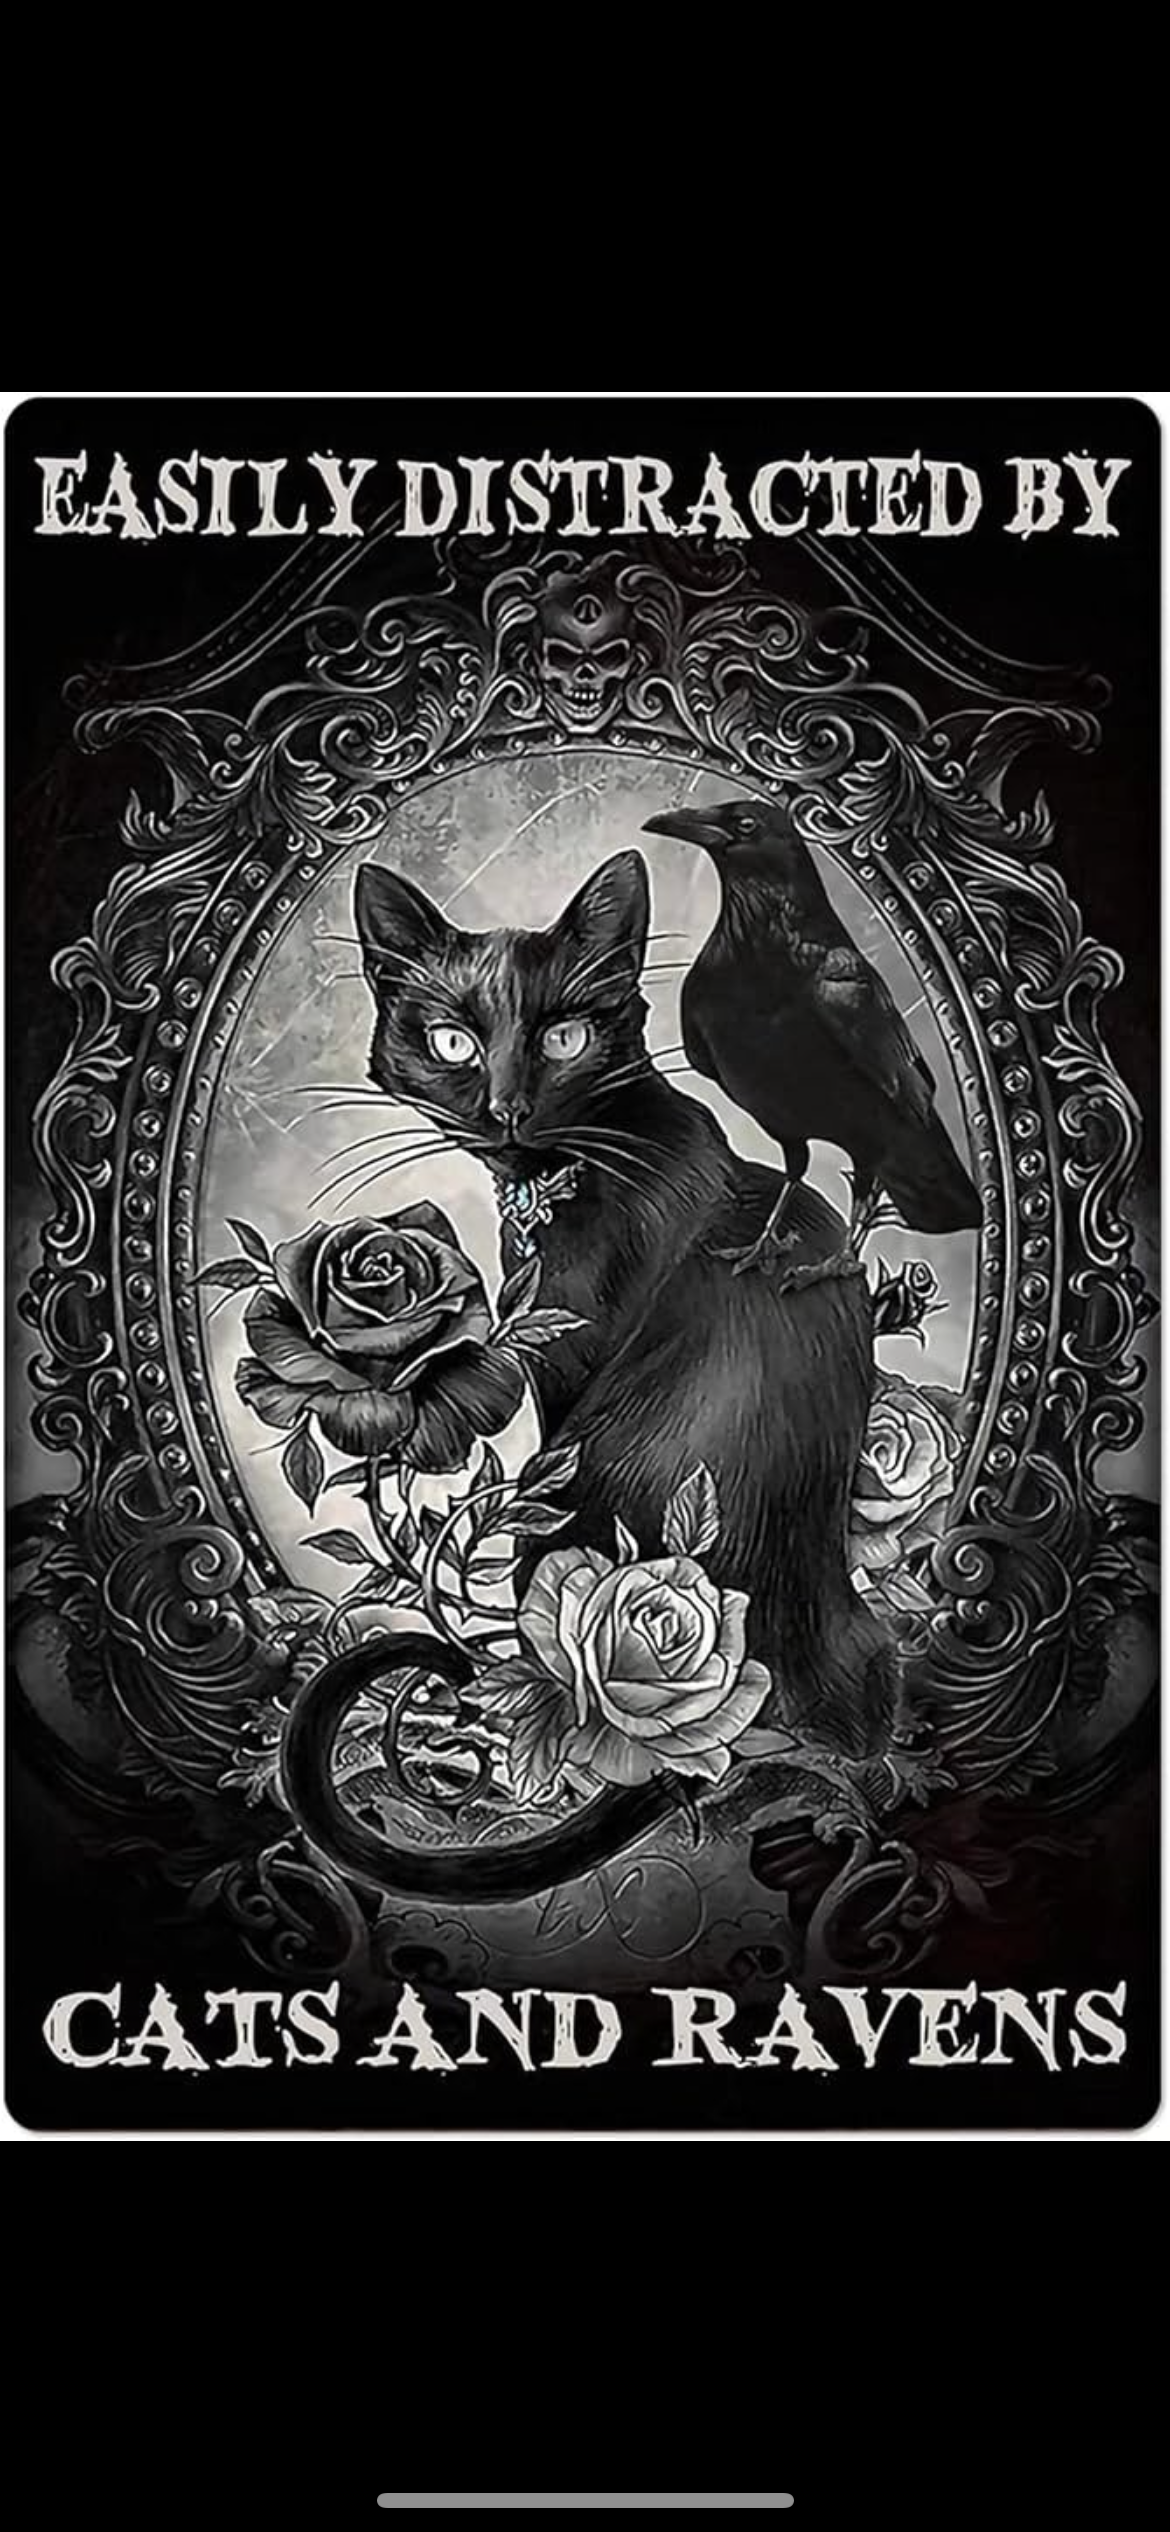 Metal Wall Plaque Easily Distracted By Cats And Ravens - Lighten Up Shop